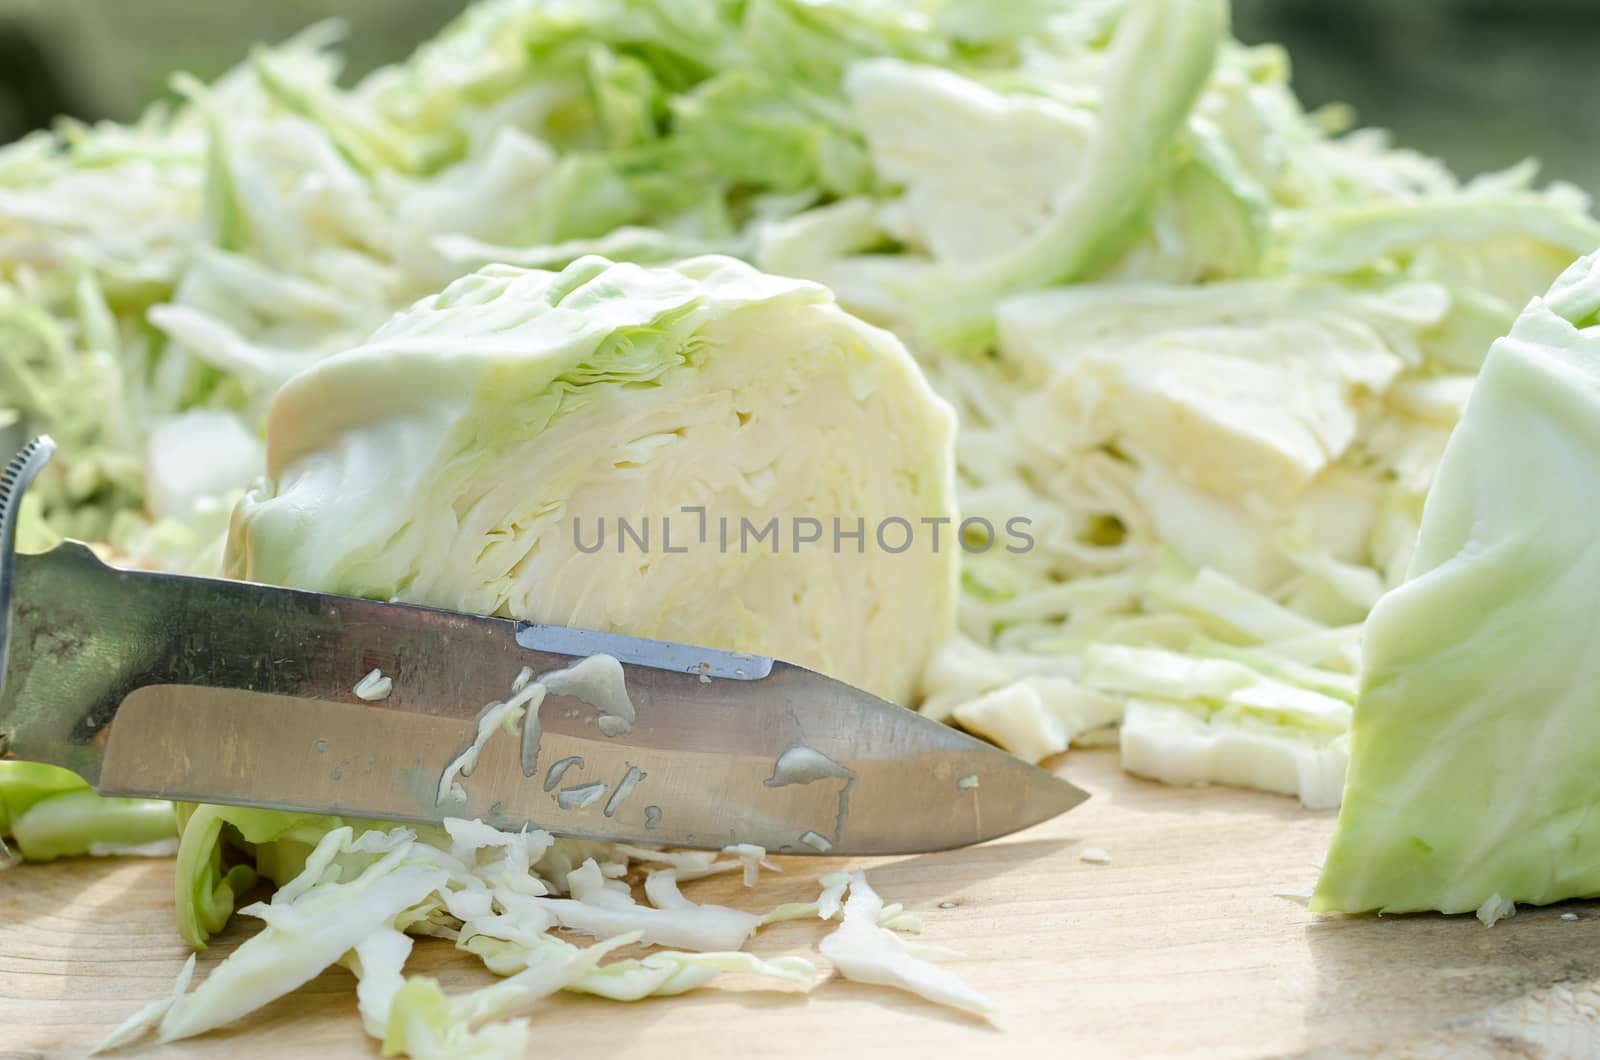 Cabbage is cut by knife on a cutting Board by Gaina